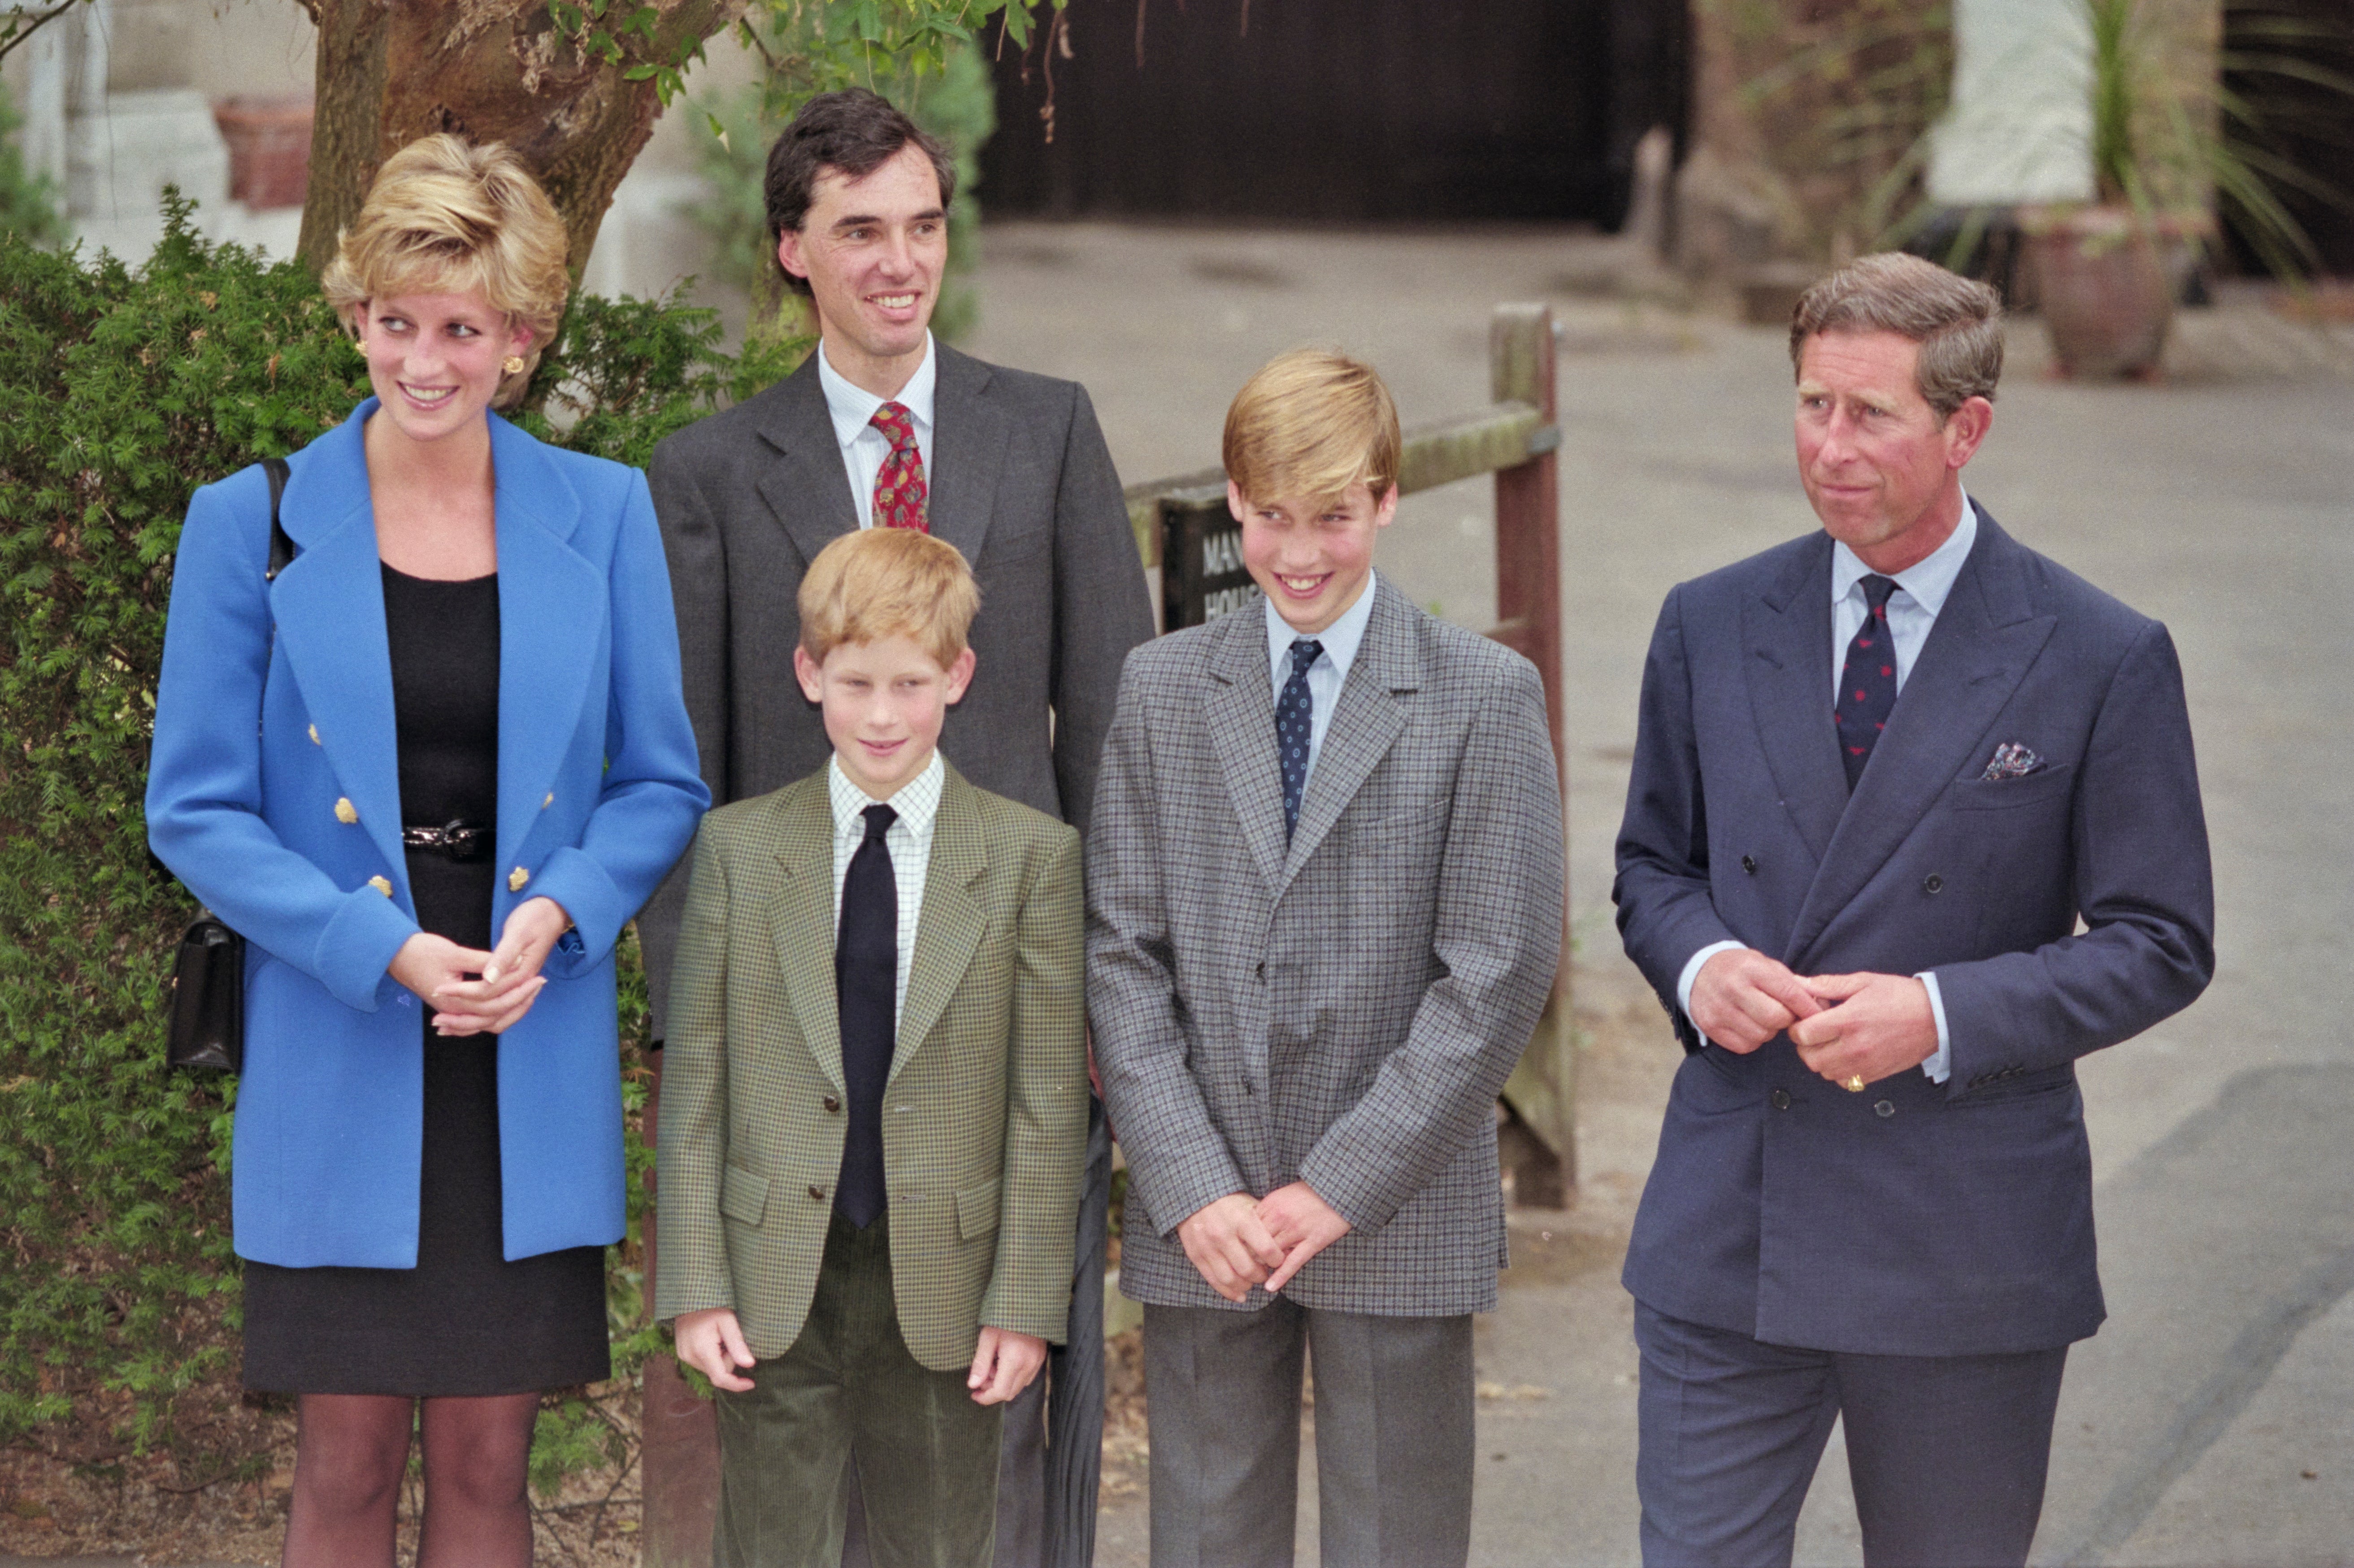 Diana, Princess of Wales (1961-1997), wearing a blue jacket over a black dress, with Eton housemaster Dr Andrew Gailey, Prince Harry, Prince William, and Prince Charles outside Manor House on Prince William's first day at Eton College in Eton